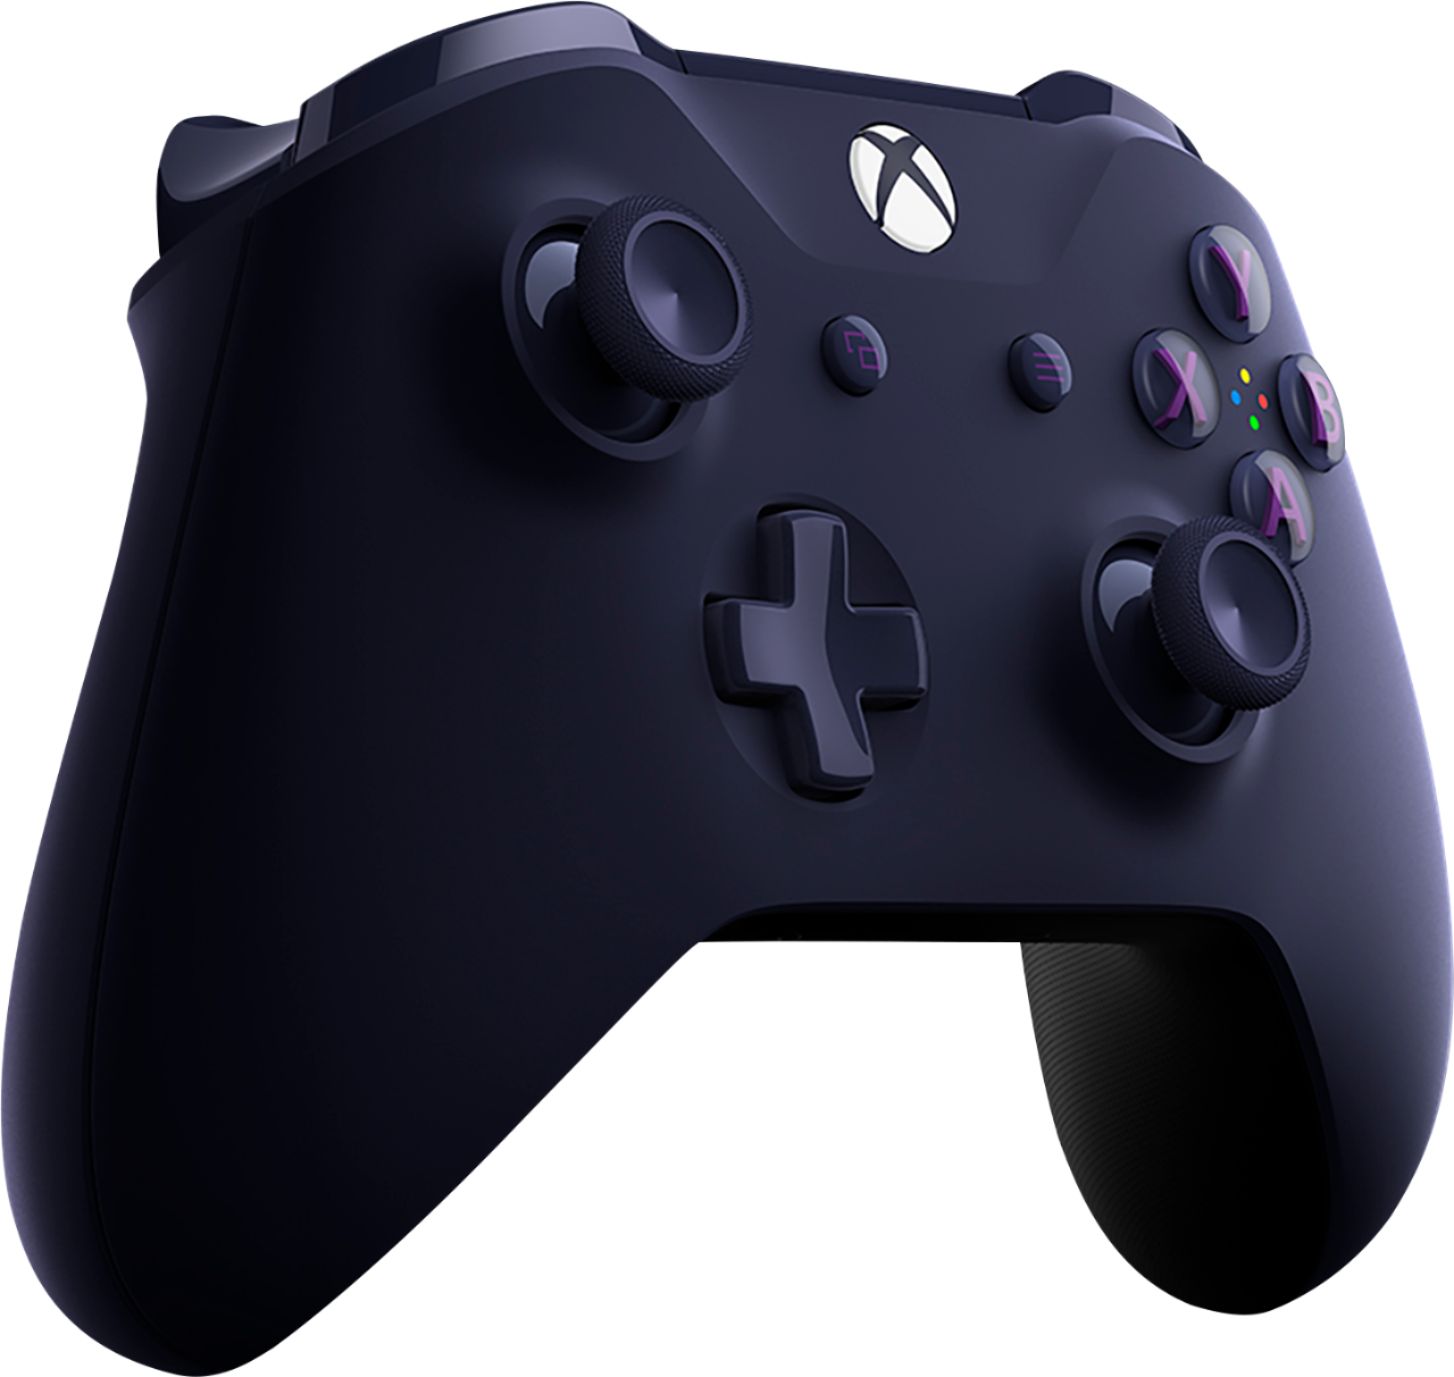 Angle View: Microsoft - Geek Squad Certified Refurbished Wireless Controller for Xbox One and Windows 10 - Epic Purple Special Edition